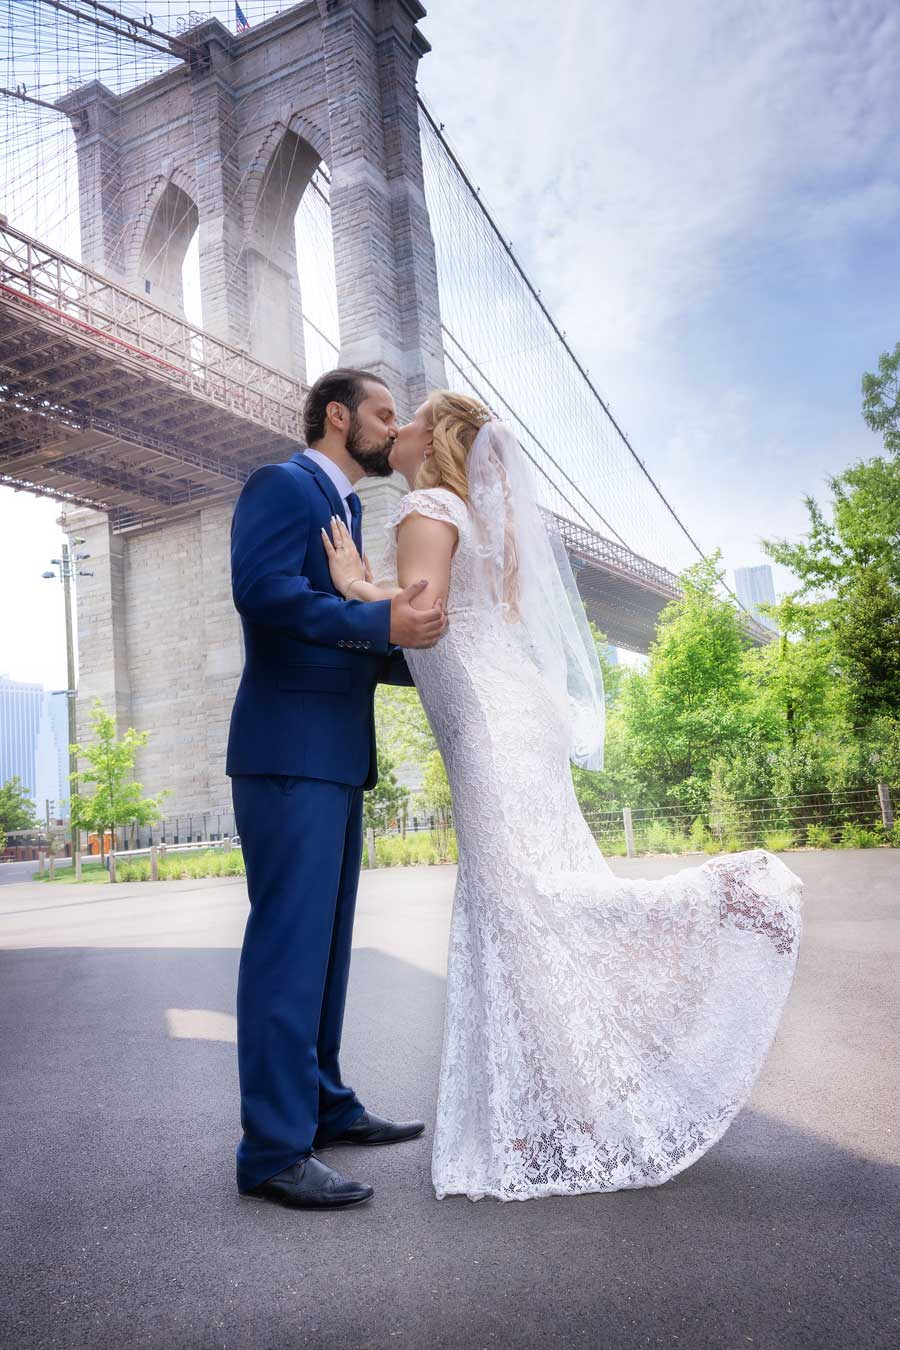 wedding photography packages, nyc wedding photographer, wedding photography pricing, best wedding photo package